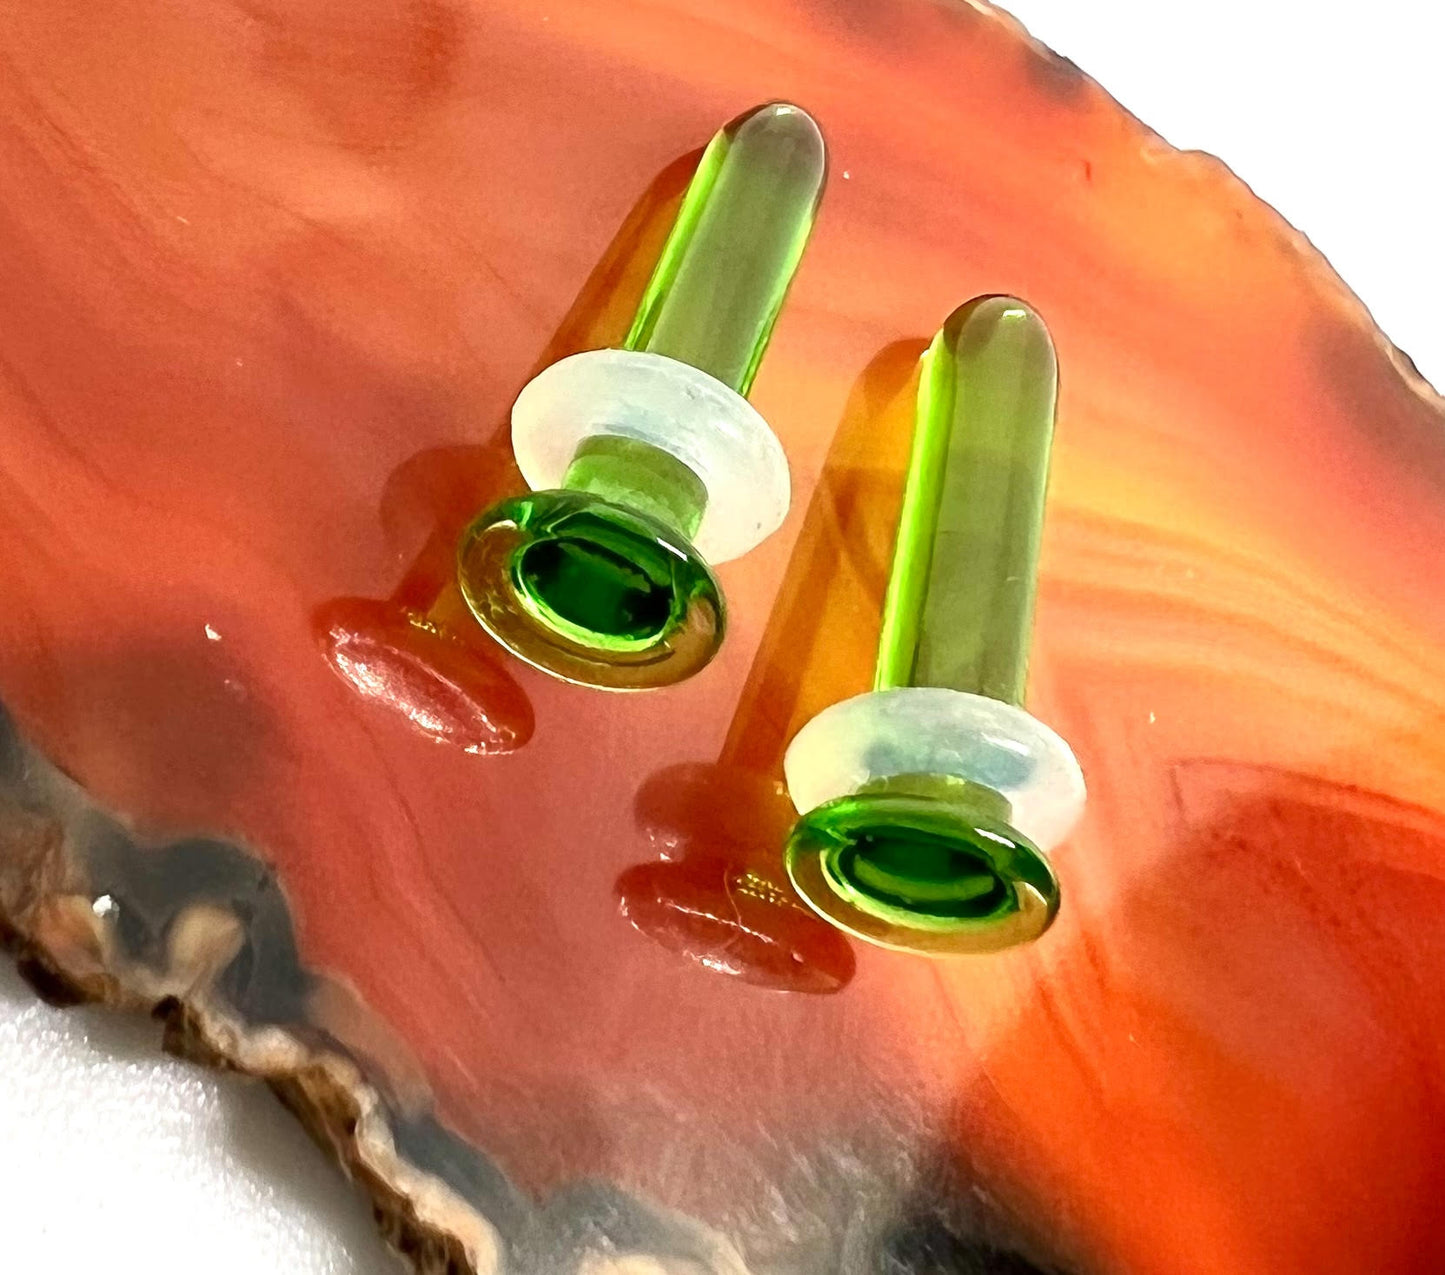 Forest Green hand blown glass plugs. Fantastic starter pieces for your ear stretching journey!